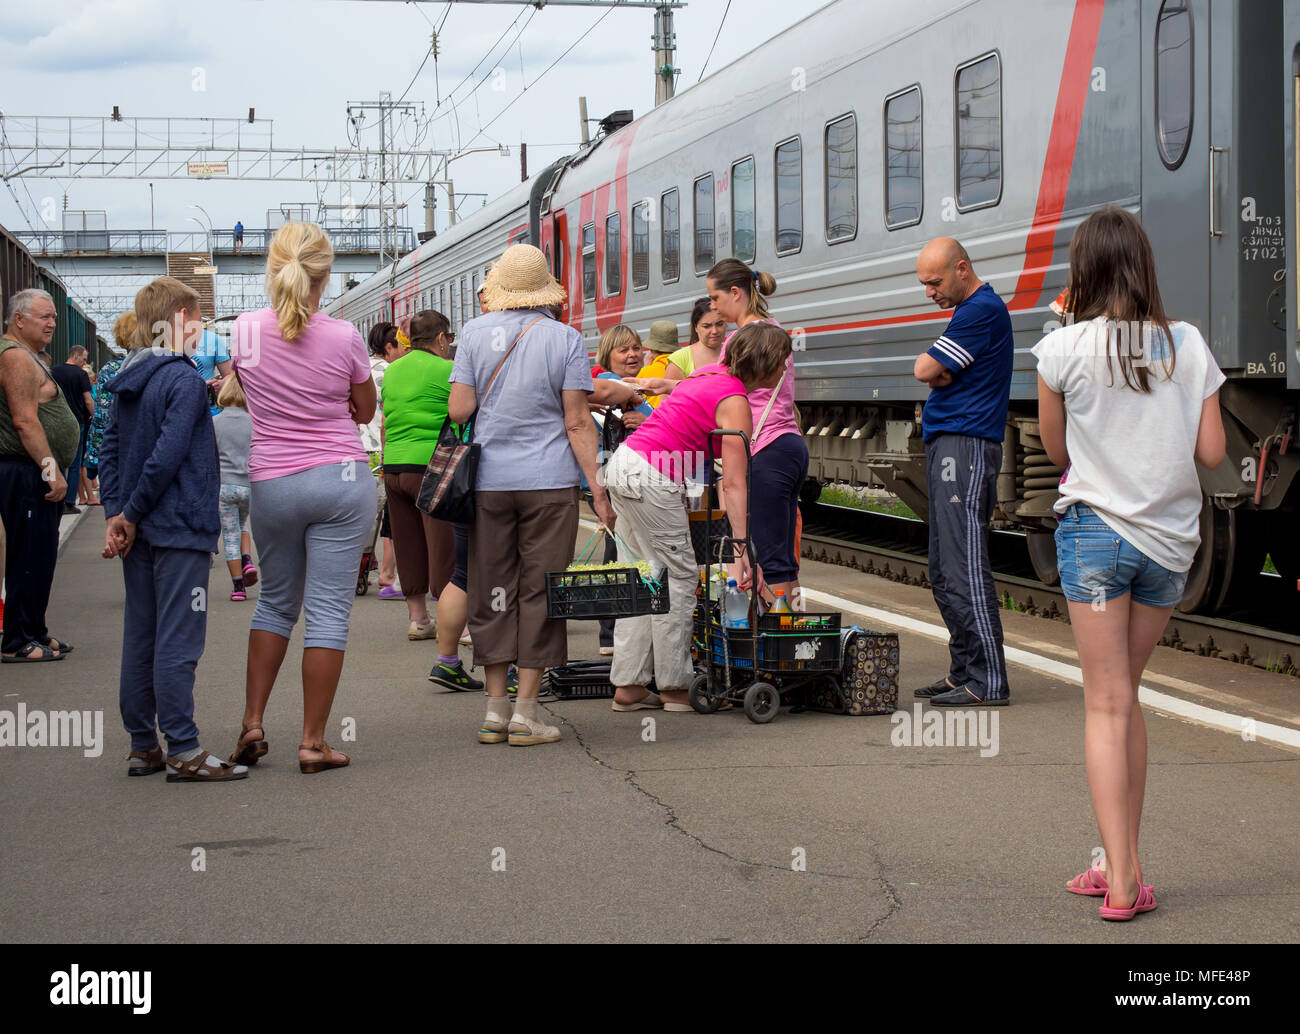 Petrozavodsk, Russia - June18, 2017: Trade in products from trains at the railway station Petrozavodsk Stock Photo